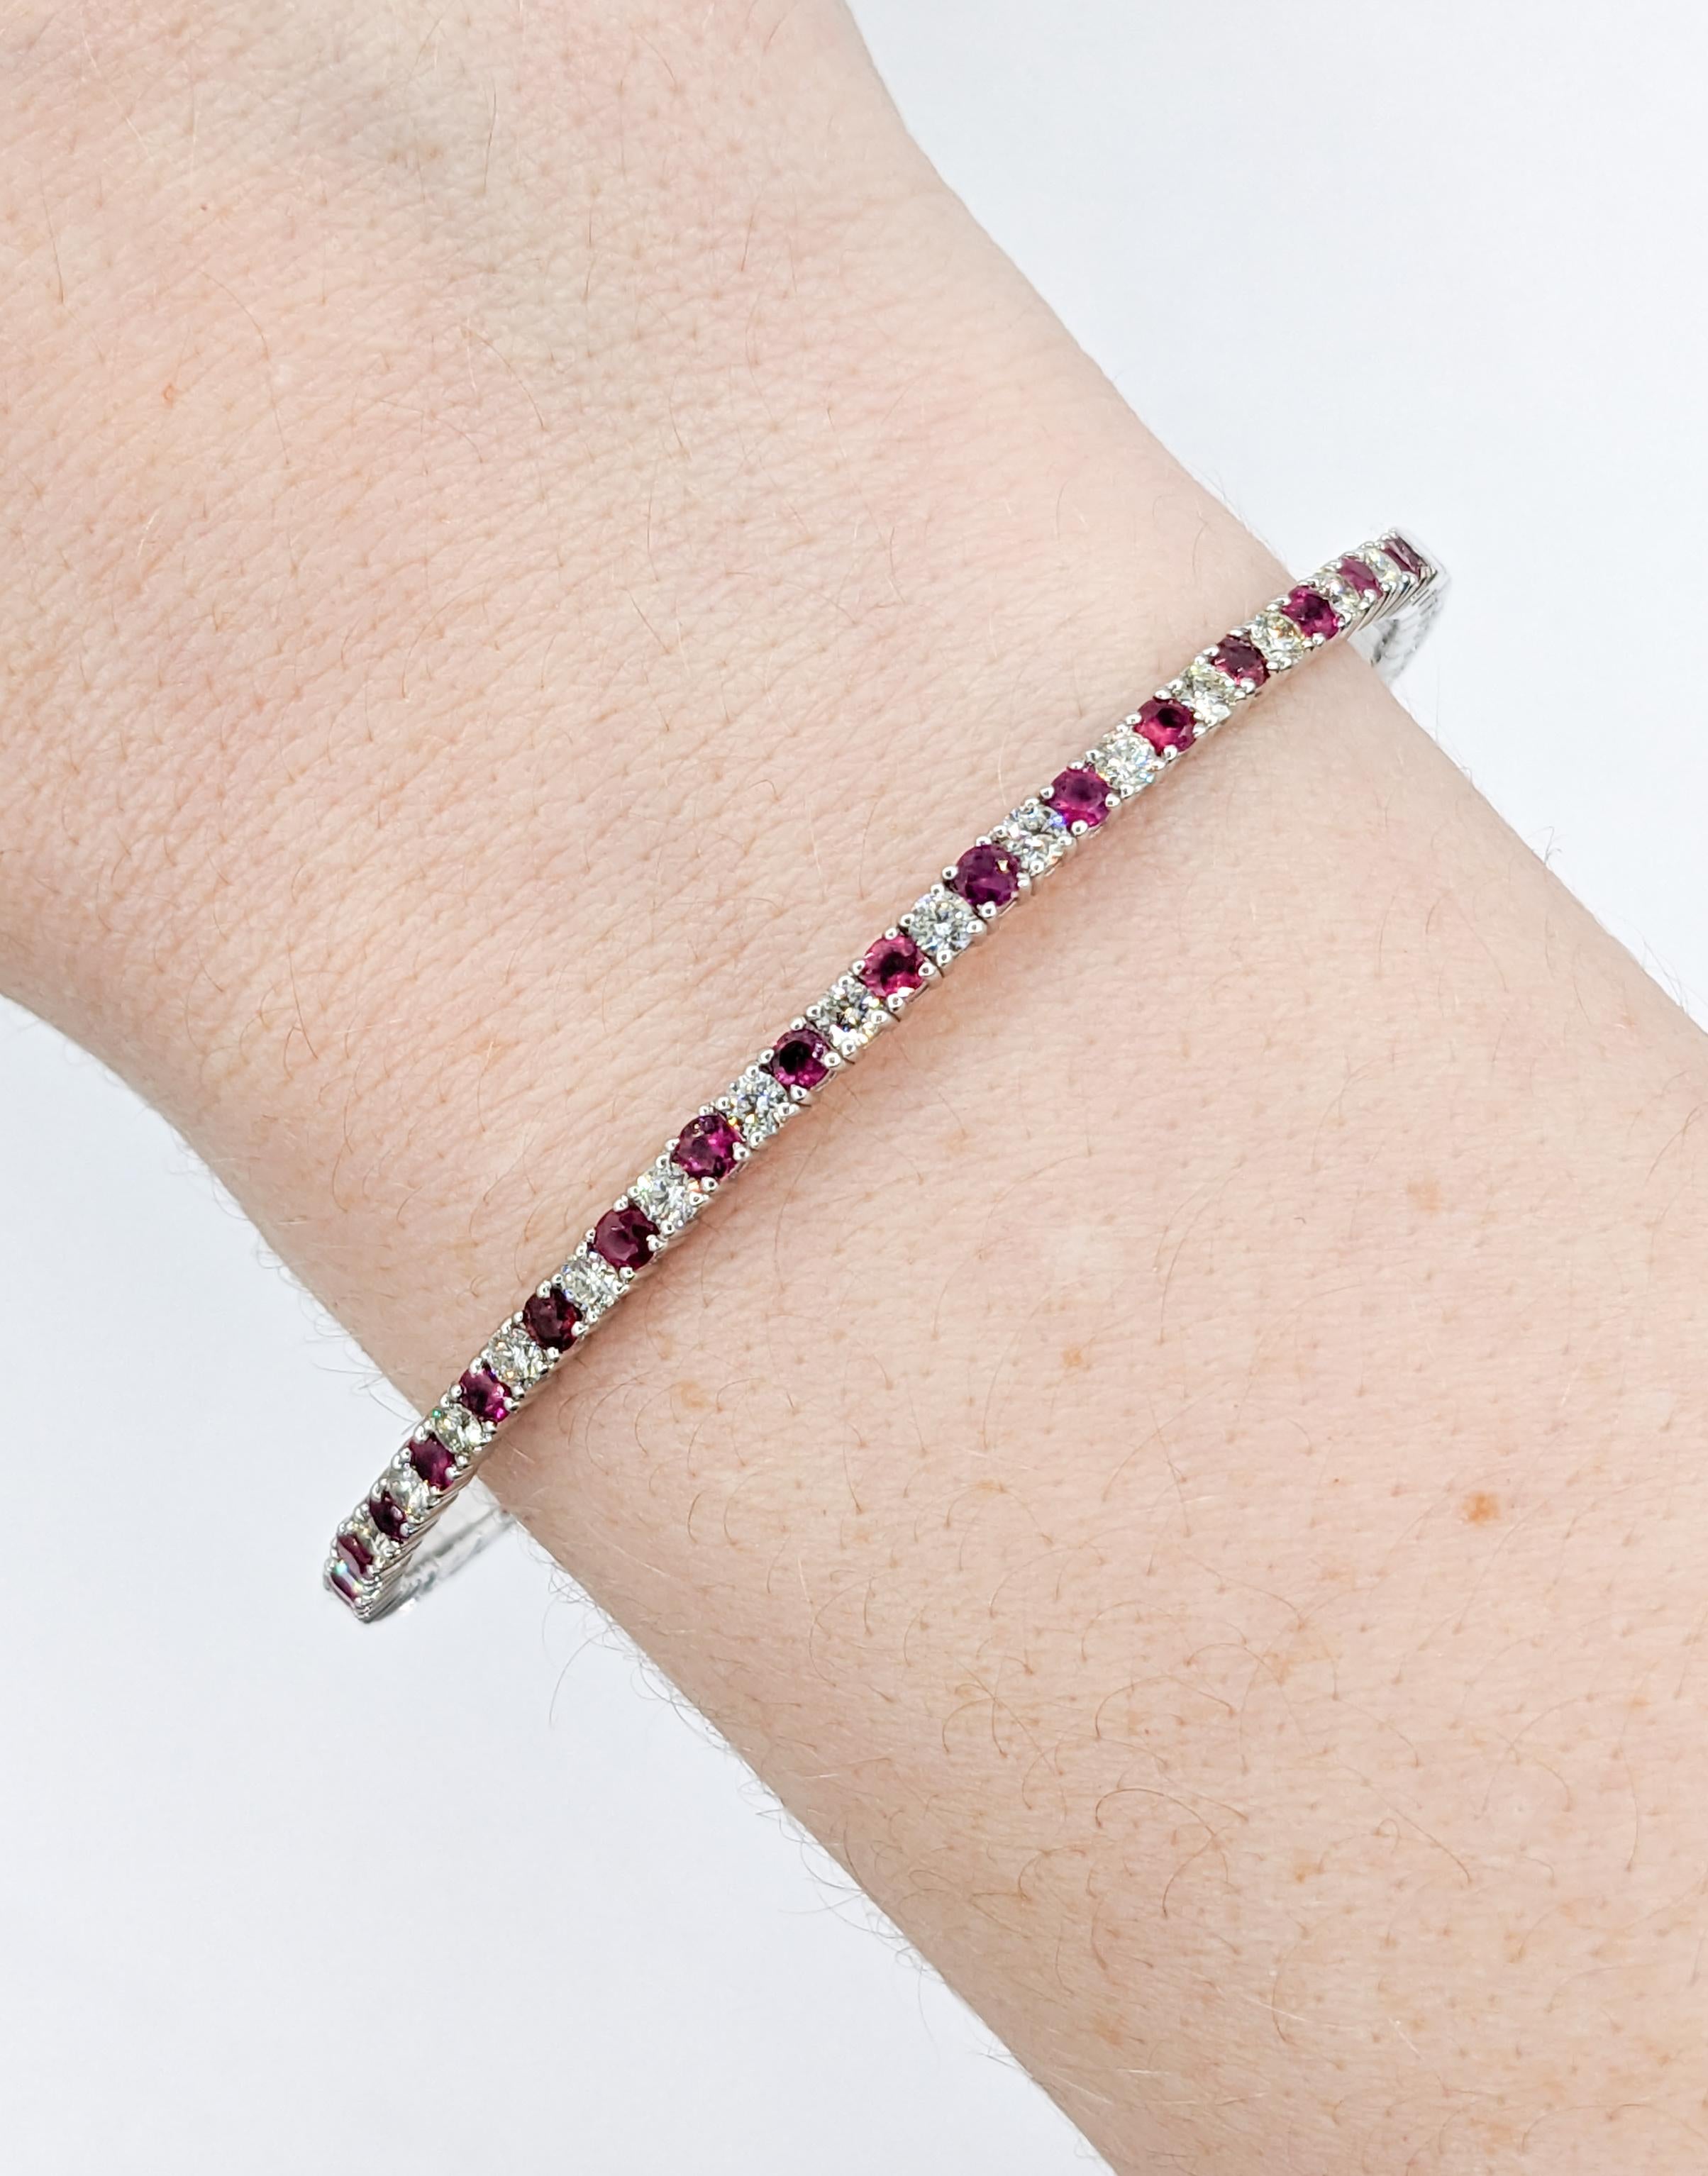 1.40ctw Ruby & 1.10ctw Diamond Flex Bracelet White Gold

Presenting our exquisite bracelet, exquisitely crafted in 14kt white gold, and set with a flexible arrangement of 1.12ctw diamonds that shimmer with SI-I clarity and a near colorless